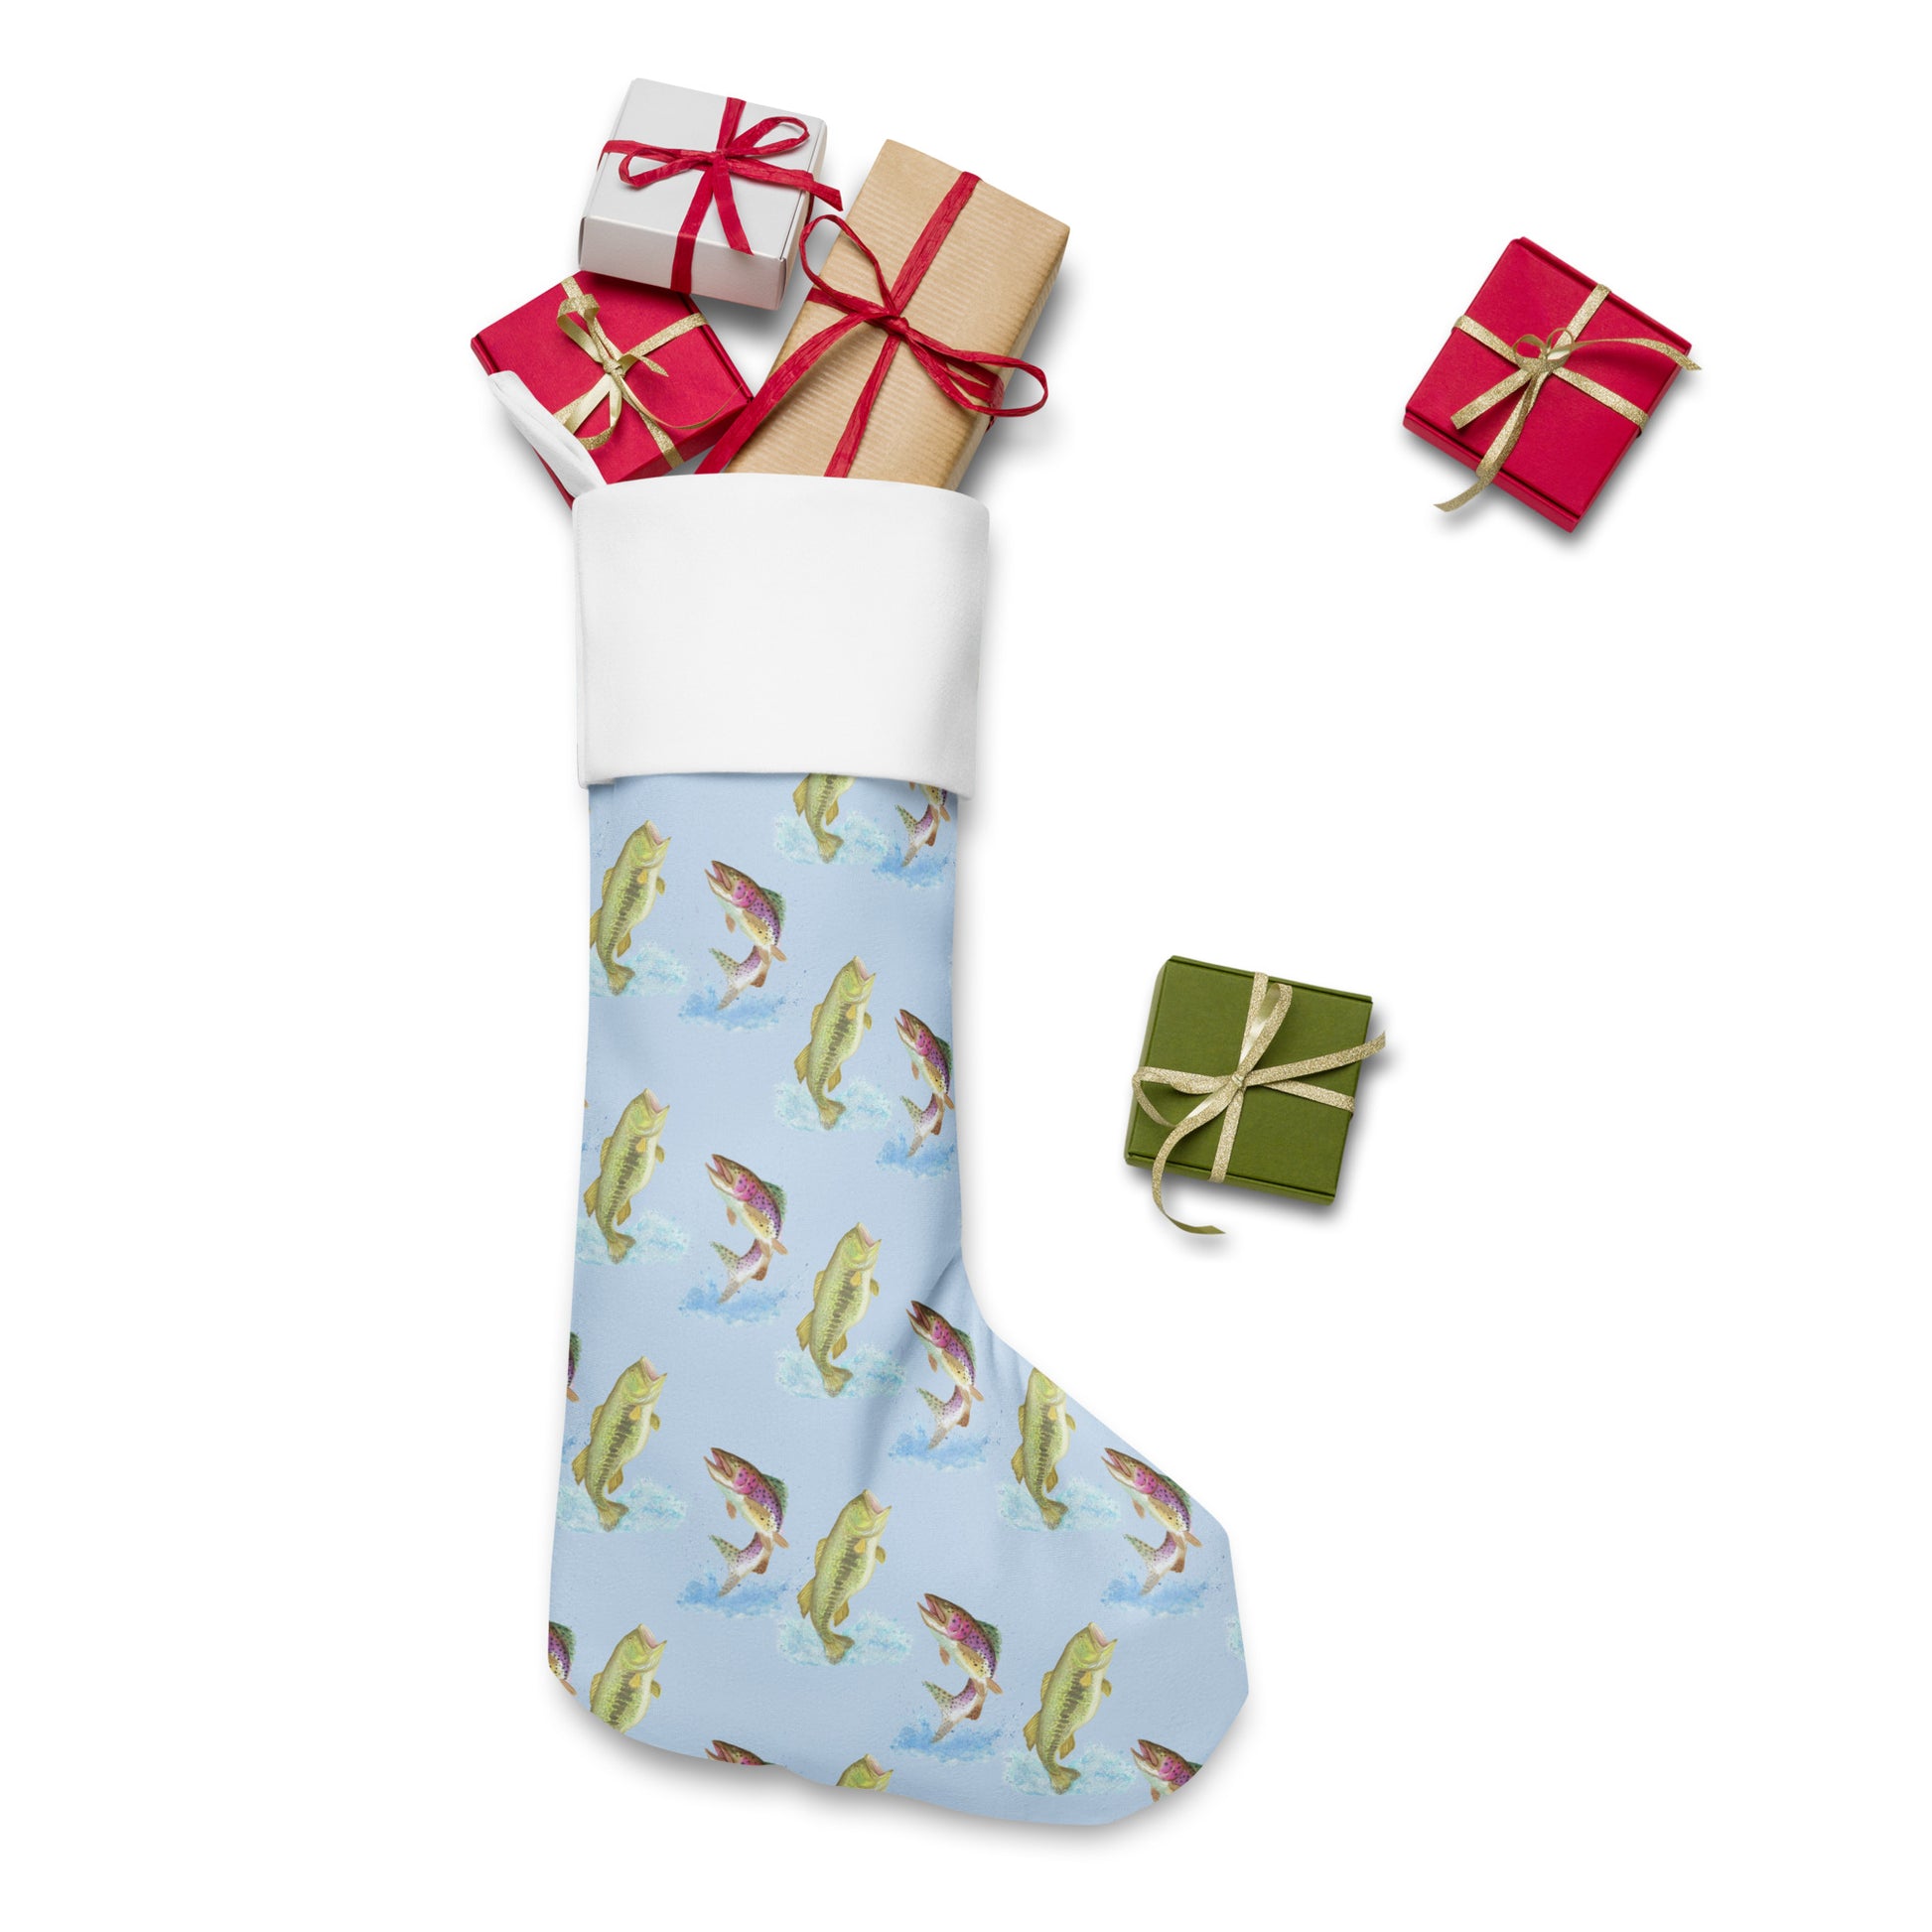 Limited Edition Blue Fishing Christmas Stocking.  7 by 18 inches. The front has watercolor rainbow trout and largemouth bass patterned on a blue background and an off-white polyester back fabric. It has a white fold-over cuff and a hanging loop. Shown stuffed with presents.